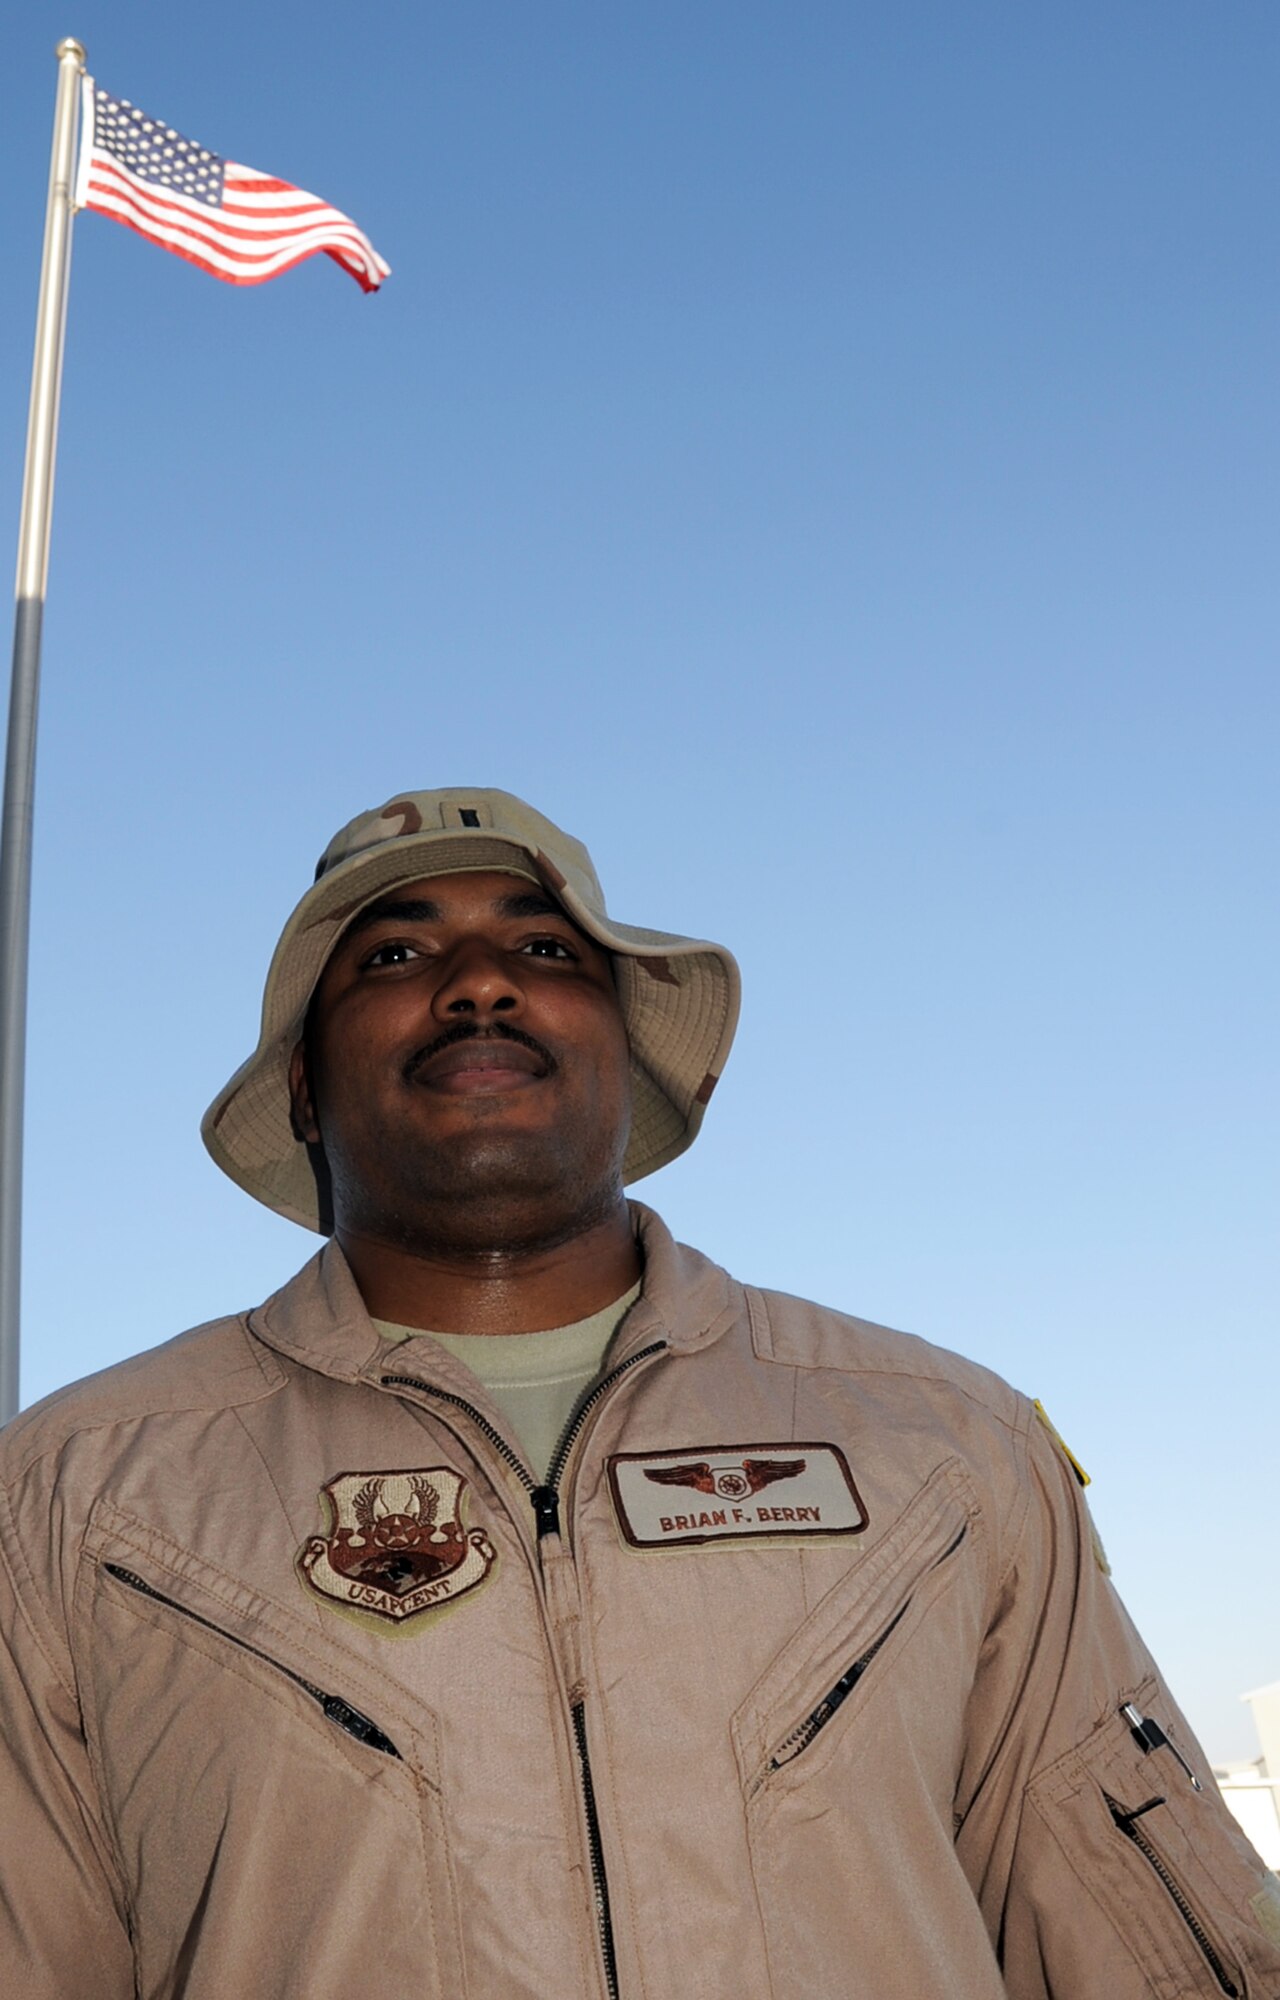 First Lt. Brian Berry is an E-3 Sentry Airborne Warning and Control System aircraft air weapons officer with the 965th Expeditionary Airborne Air Control Squadron deployed to a non-disclosed base in Southwest Asia.  Here he is pictured on Feb. 8, 2010. The 965th EAACS is an attached unit of the 380th Air Expeditionary Wing. The E-3 Sentry is used extensively for AWACS operations in the U.S. Central Command area of responsibility supporting Operation Iraqi Freedom, the Combined Joint Task Force-Horn of Africa, and Operation Enduring Freedom. In 2009, E-3s from the 380th AEW flew more than 370 combat sorties supporting more than 990 "troops in contact" events. (U.S. Air Force Photo/Master Sgt. Scott T. Sturkol/Released)